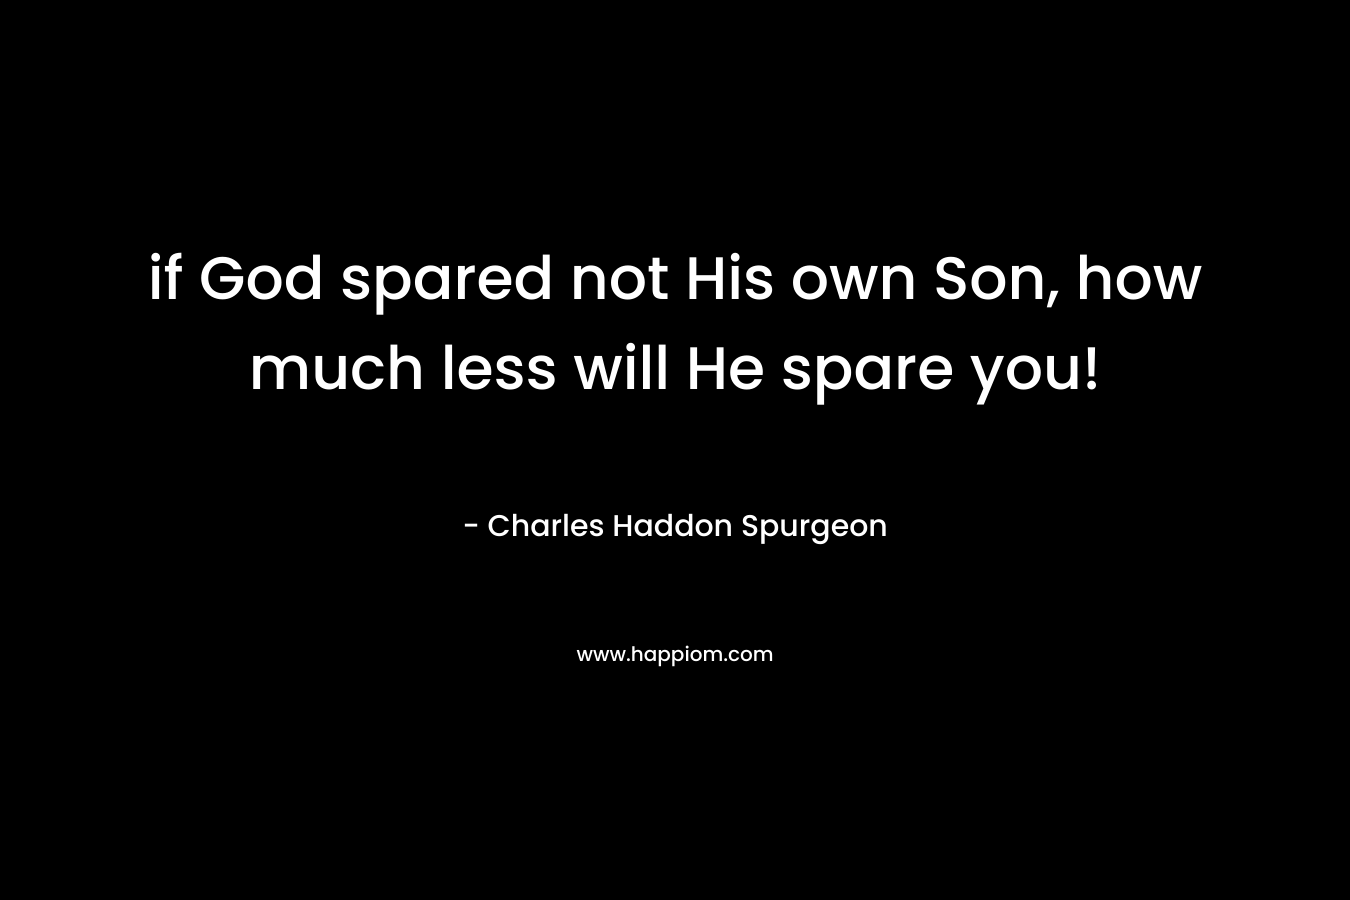 if God spared not His own Son, how much less will He spare you! – Charles Haddon Spurgeon